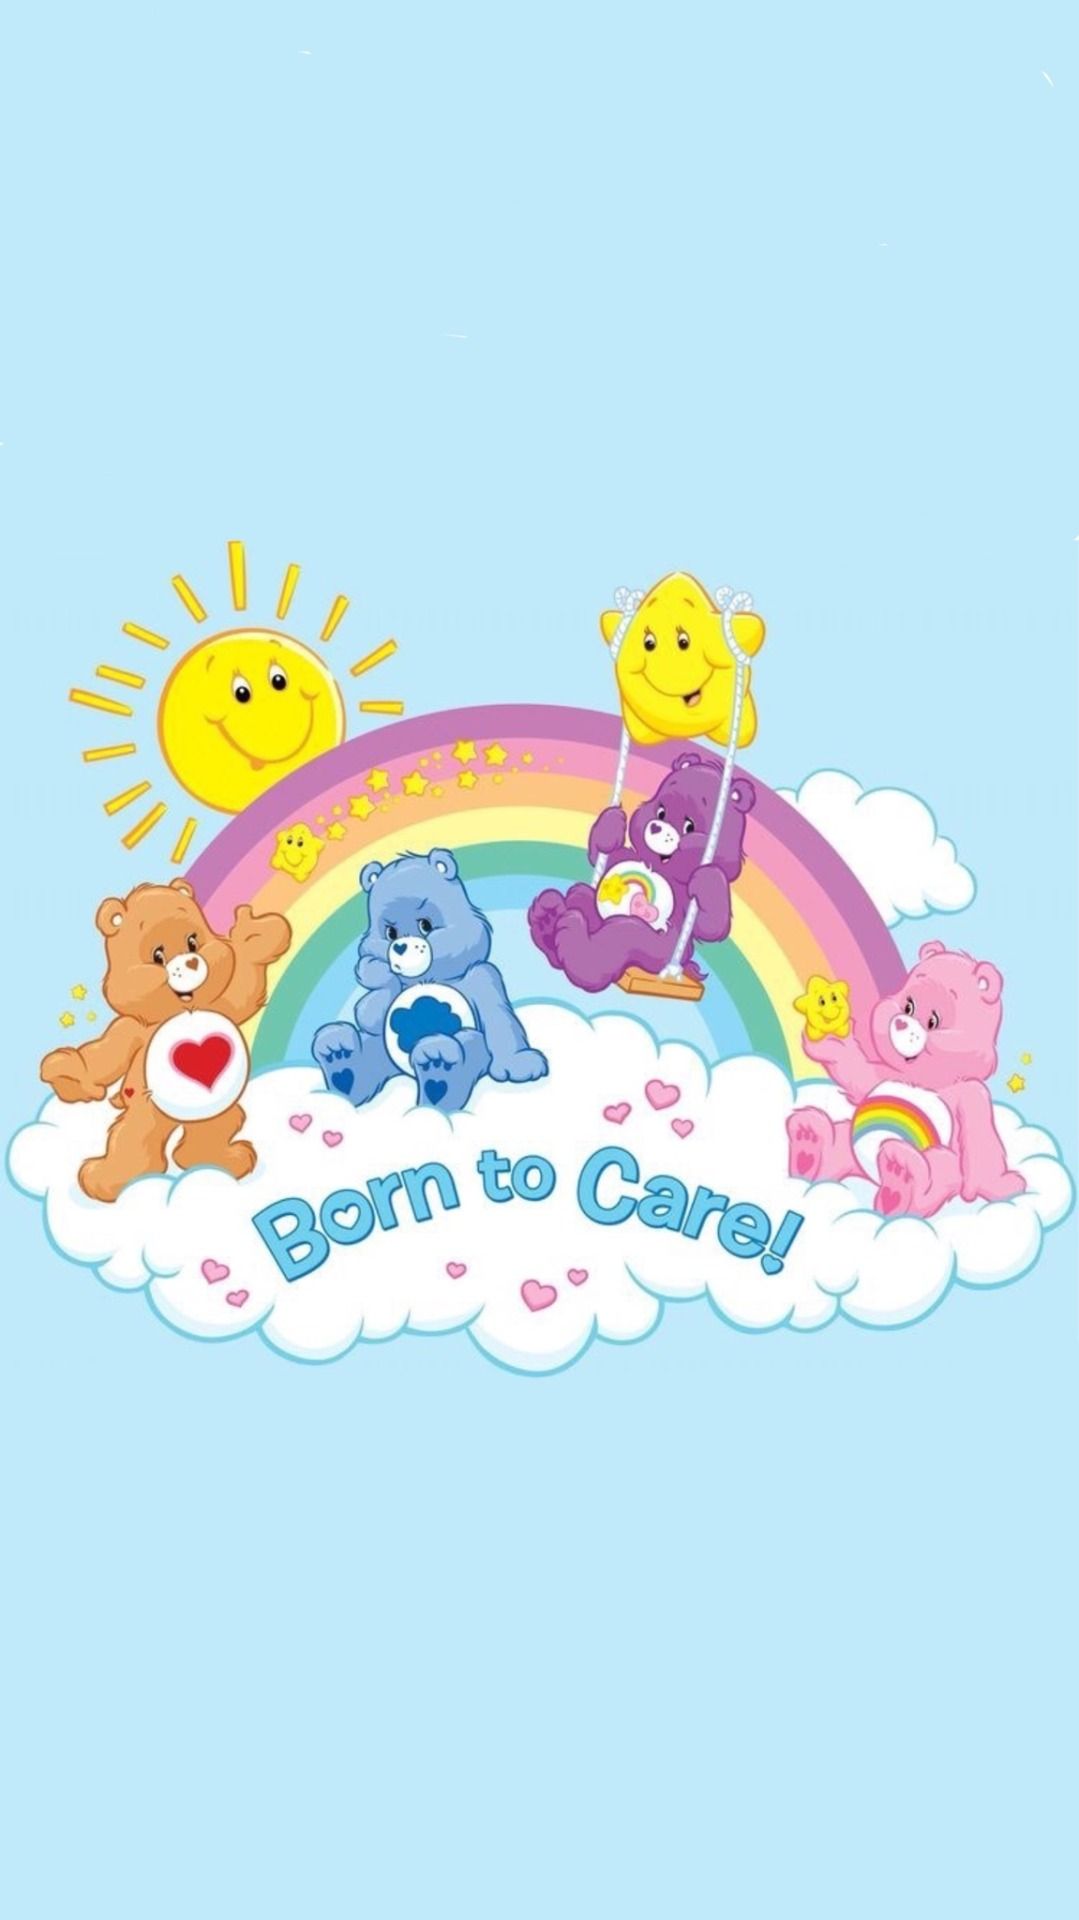 A picture of care bears with the sun in their background - Care Bears